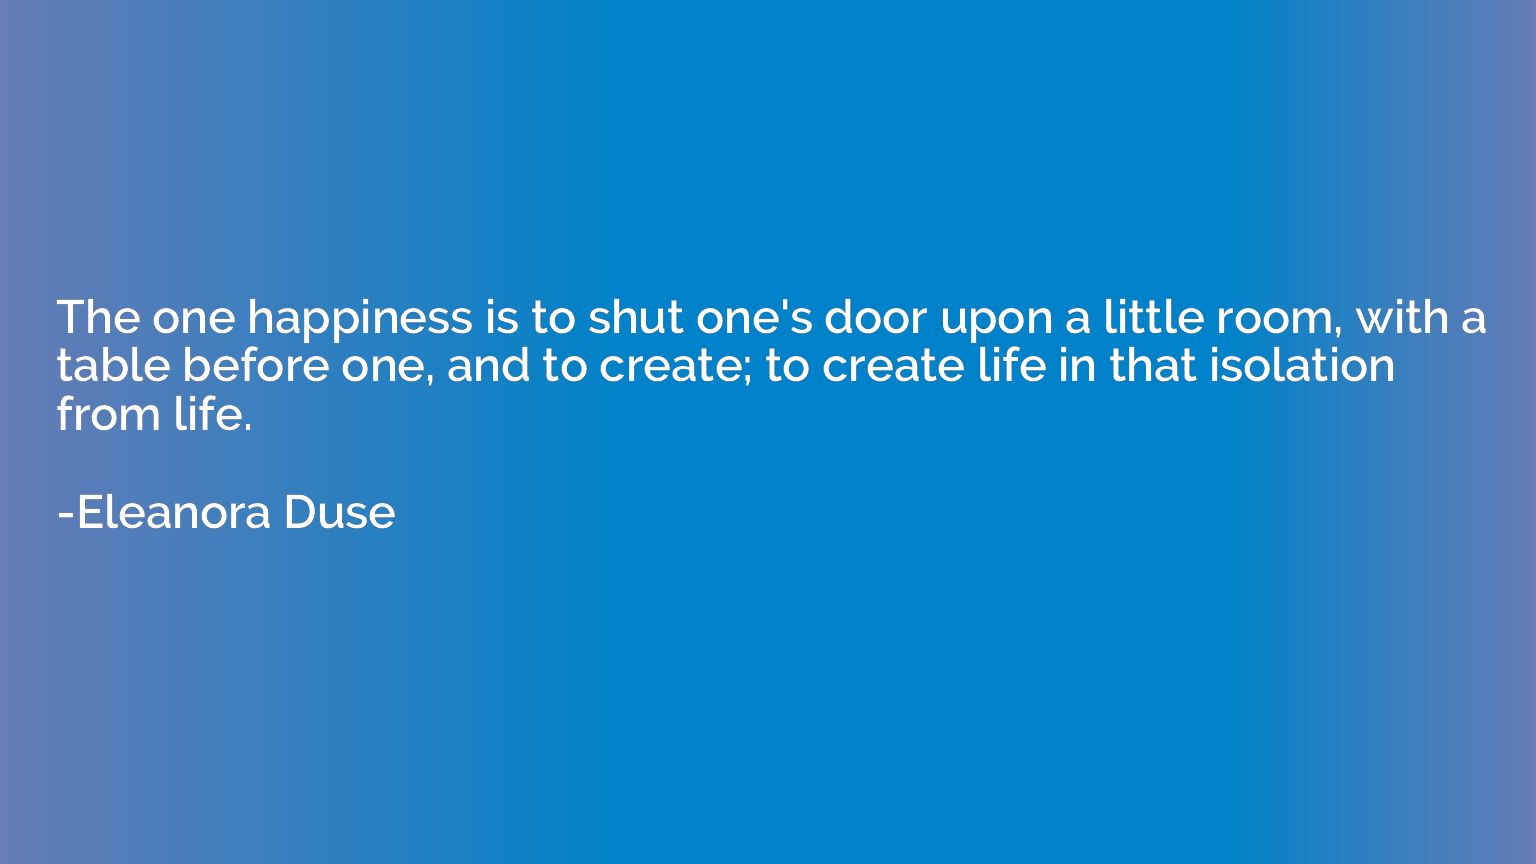 The one happiness is to shut one's door upon a little room, 